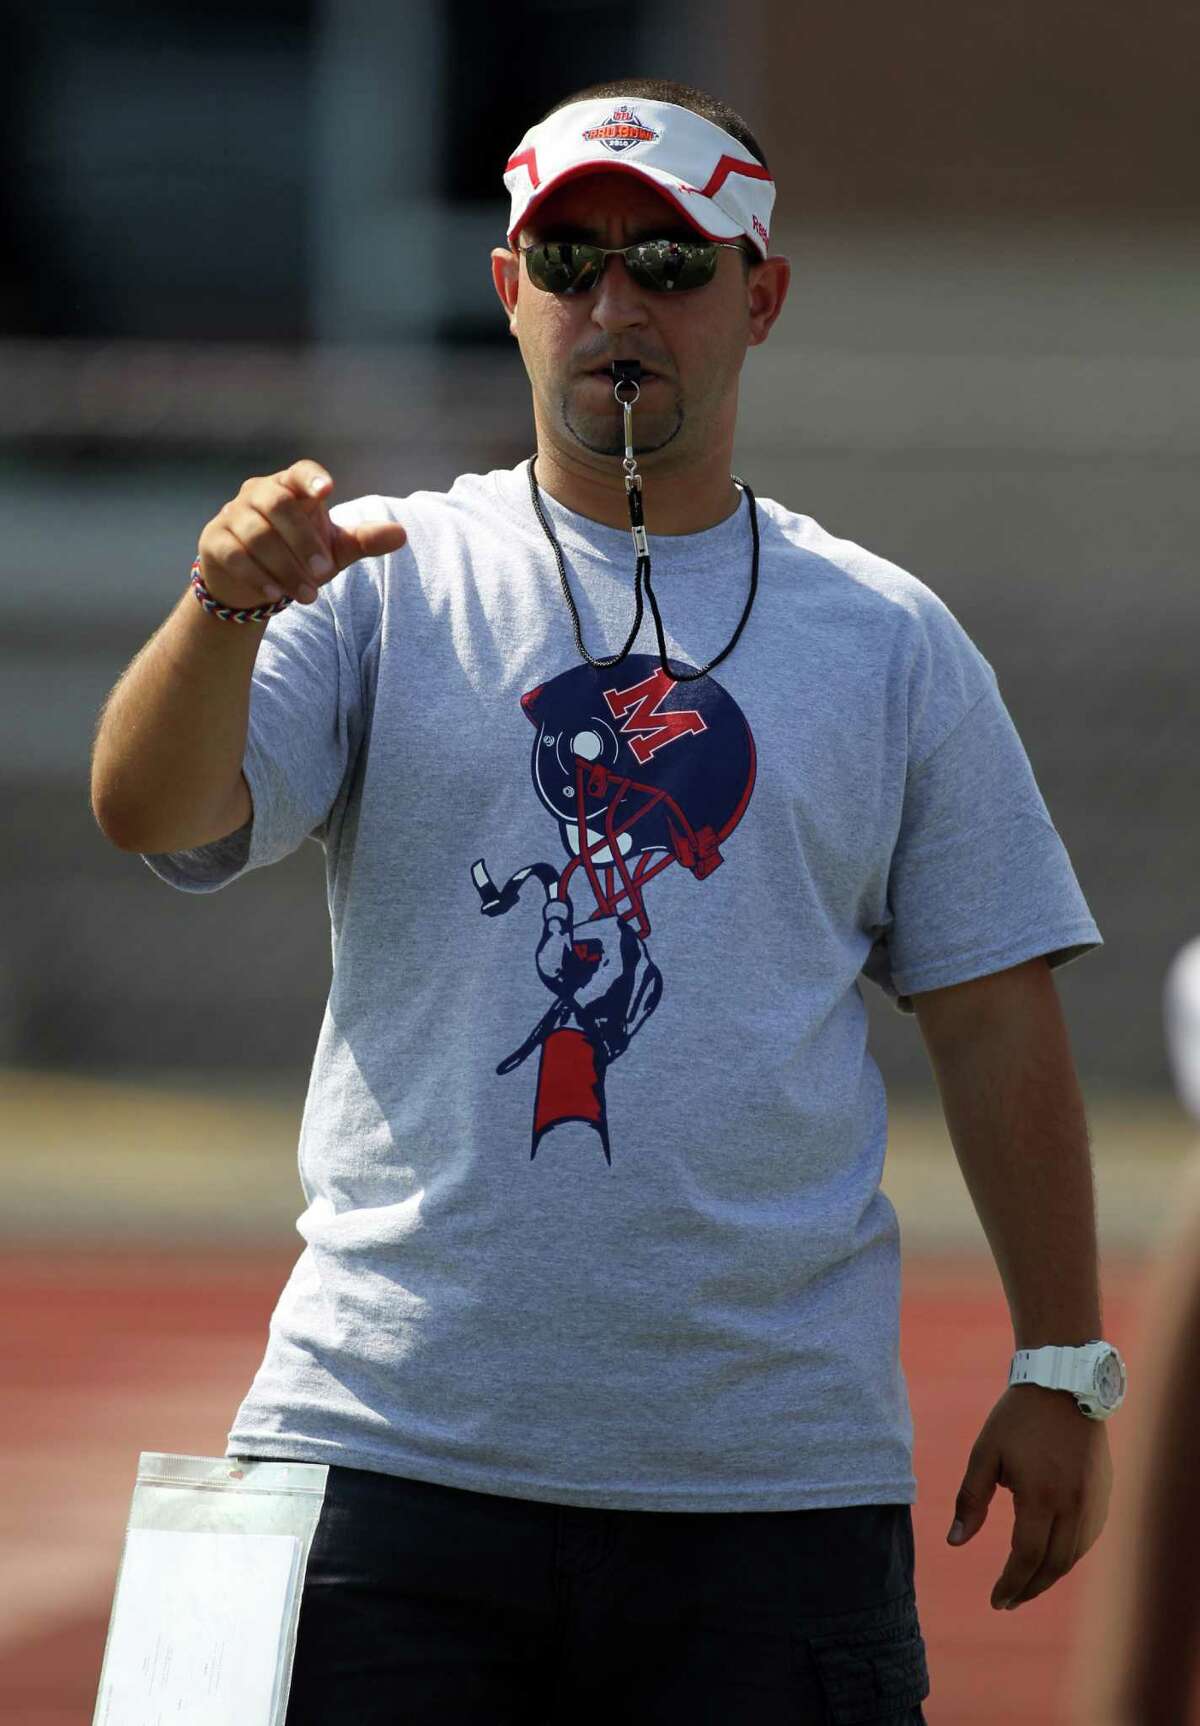 A.J. Albano, the head football coach at Brien McMahon High School, during a team practice earlier this season. His team was undefeated as of last week.